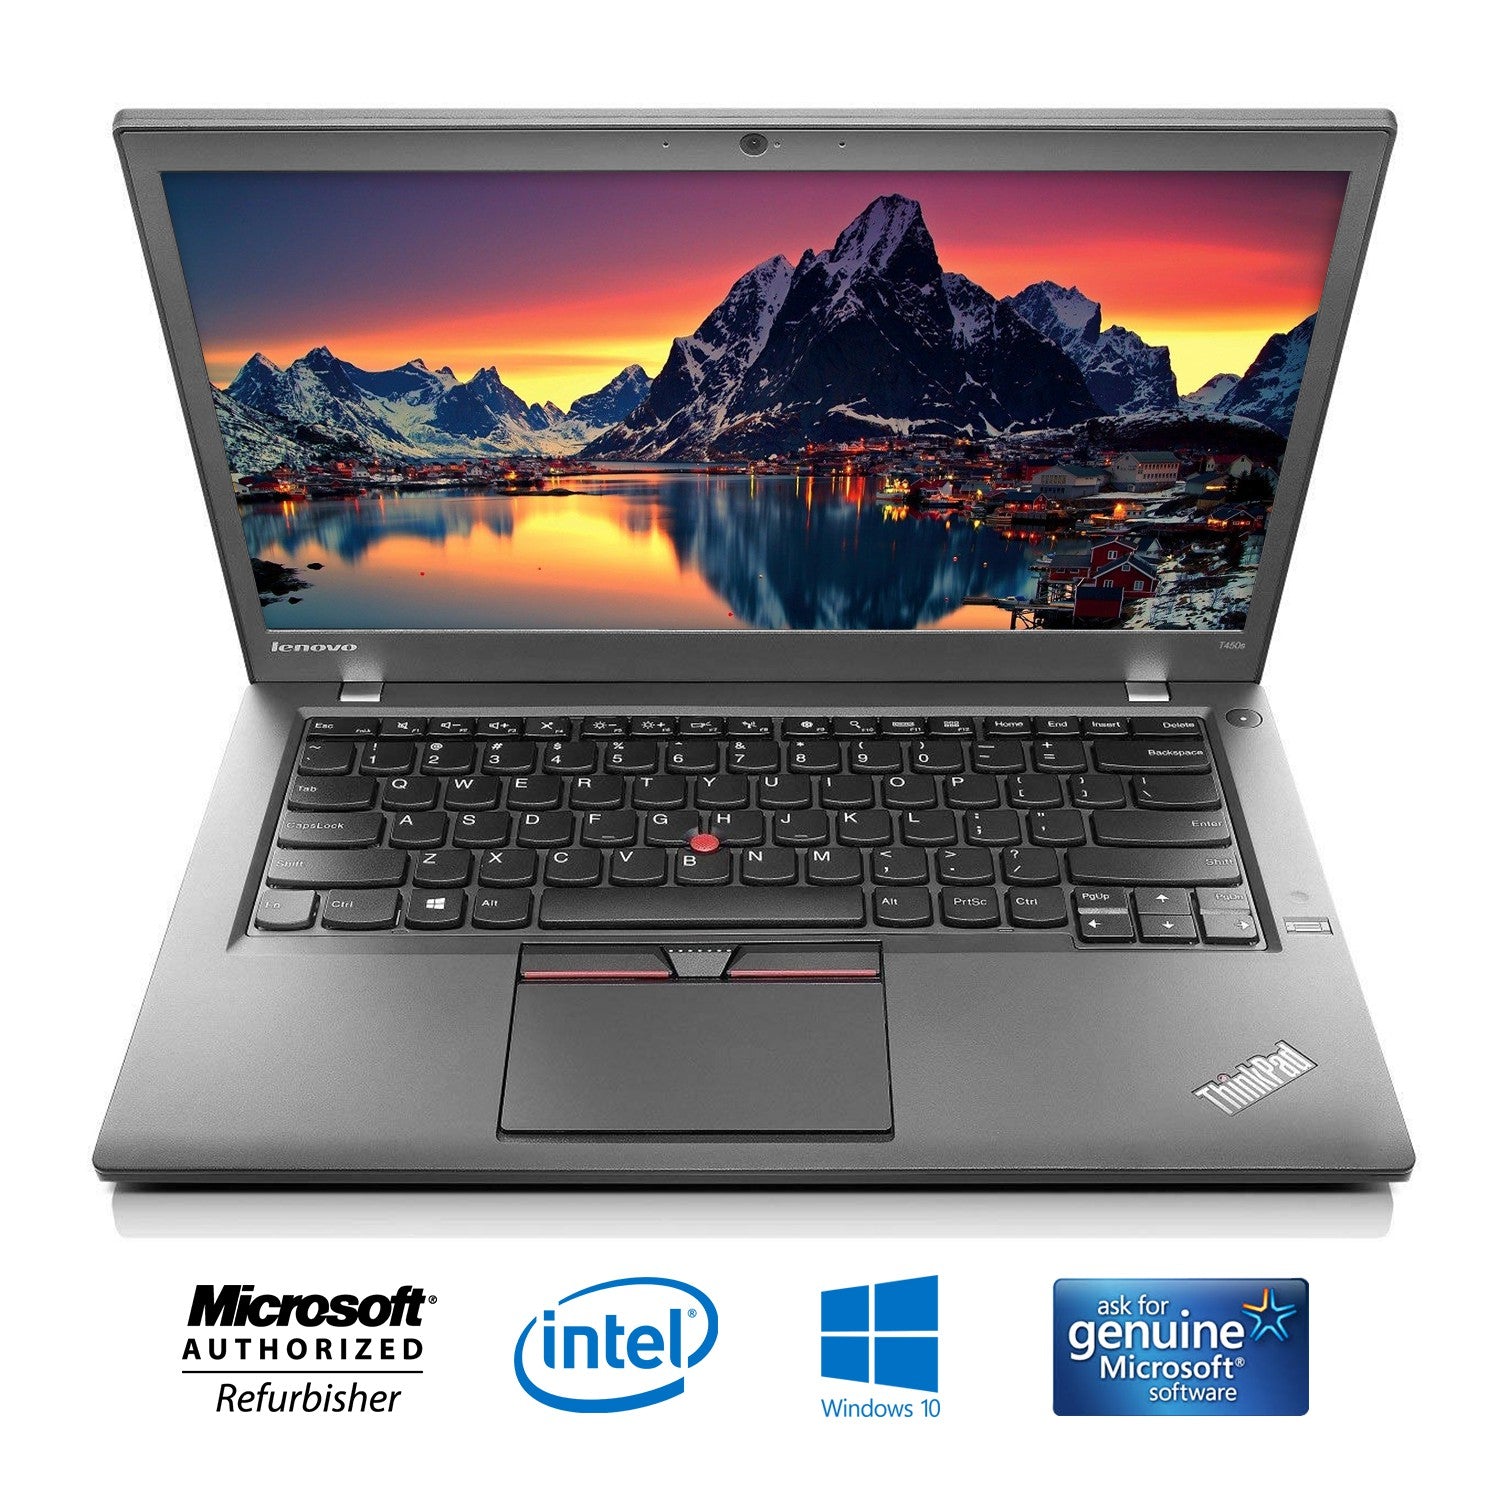 Lenovo ThinkPad T450 14in Business Notebook PC - Intel Core i7-5600u Up to 3.20GHz 8GB - 16GB DDR3 RAM 256GB -1TB SSD SSD Windows 10 Professional